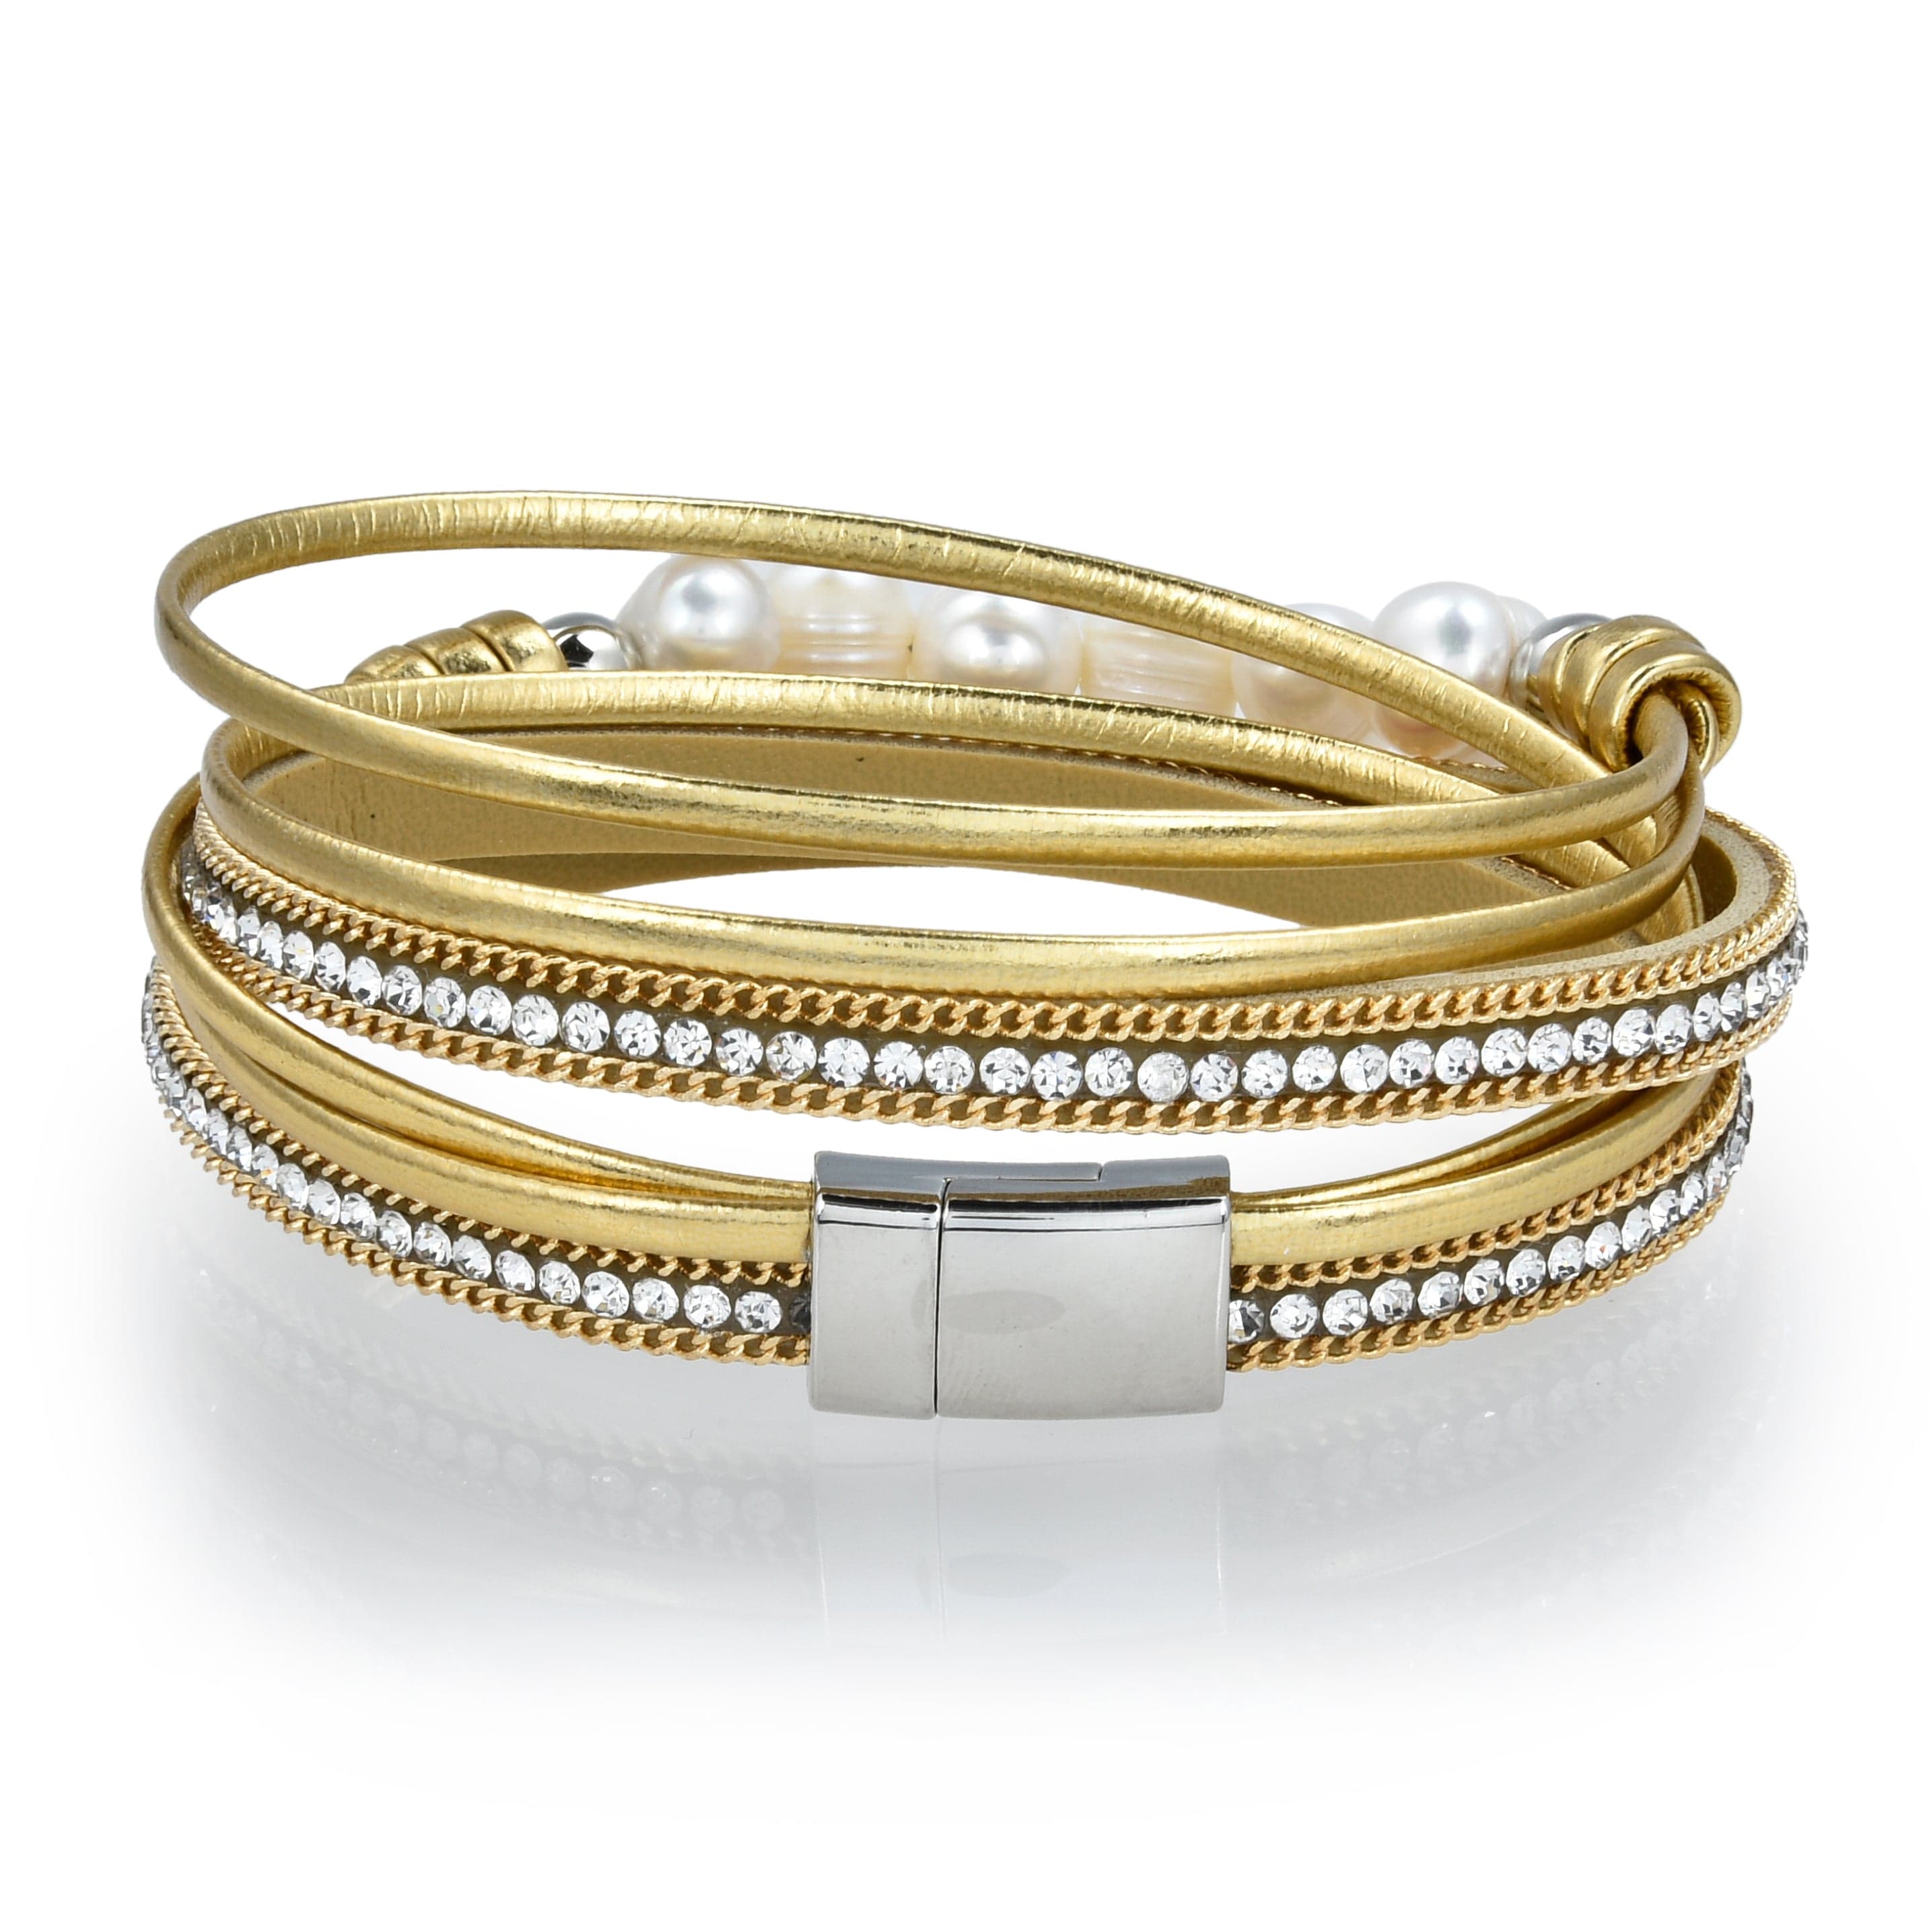 Kalifano Multiwrap Bracelets Multiple Strand Pearl and Diamonds Gold Bracelet with Magnetic Clasp BMW-20-GD